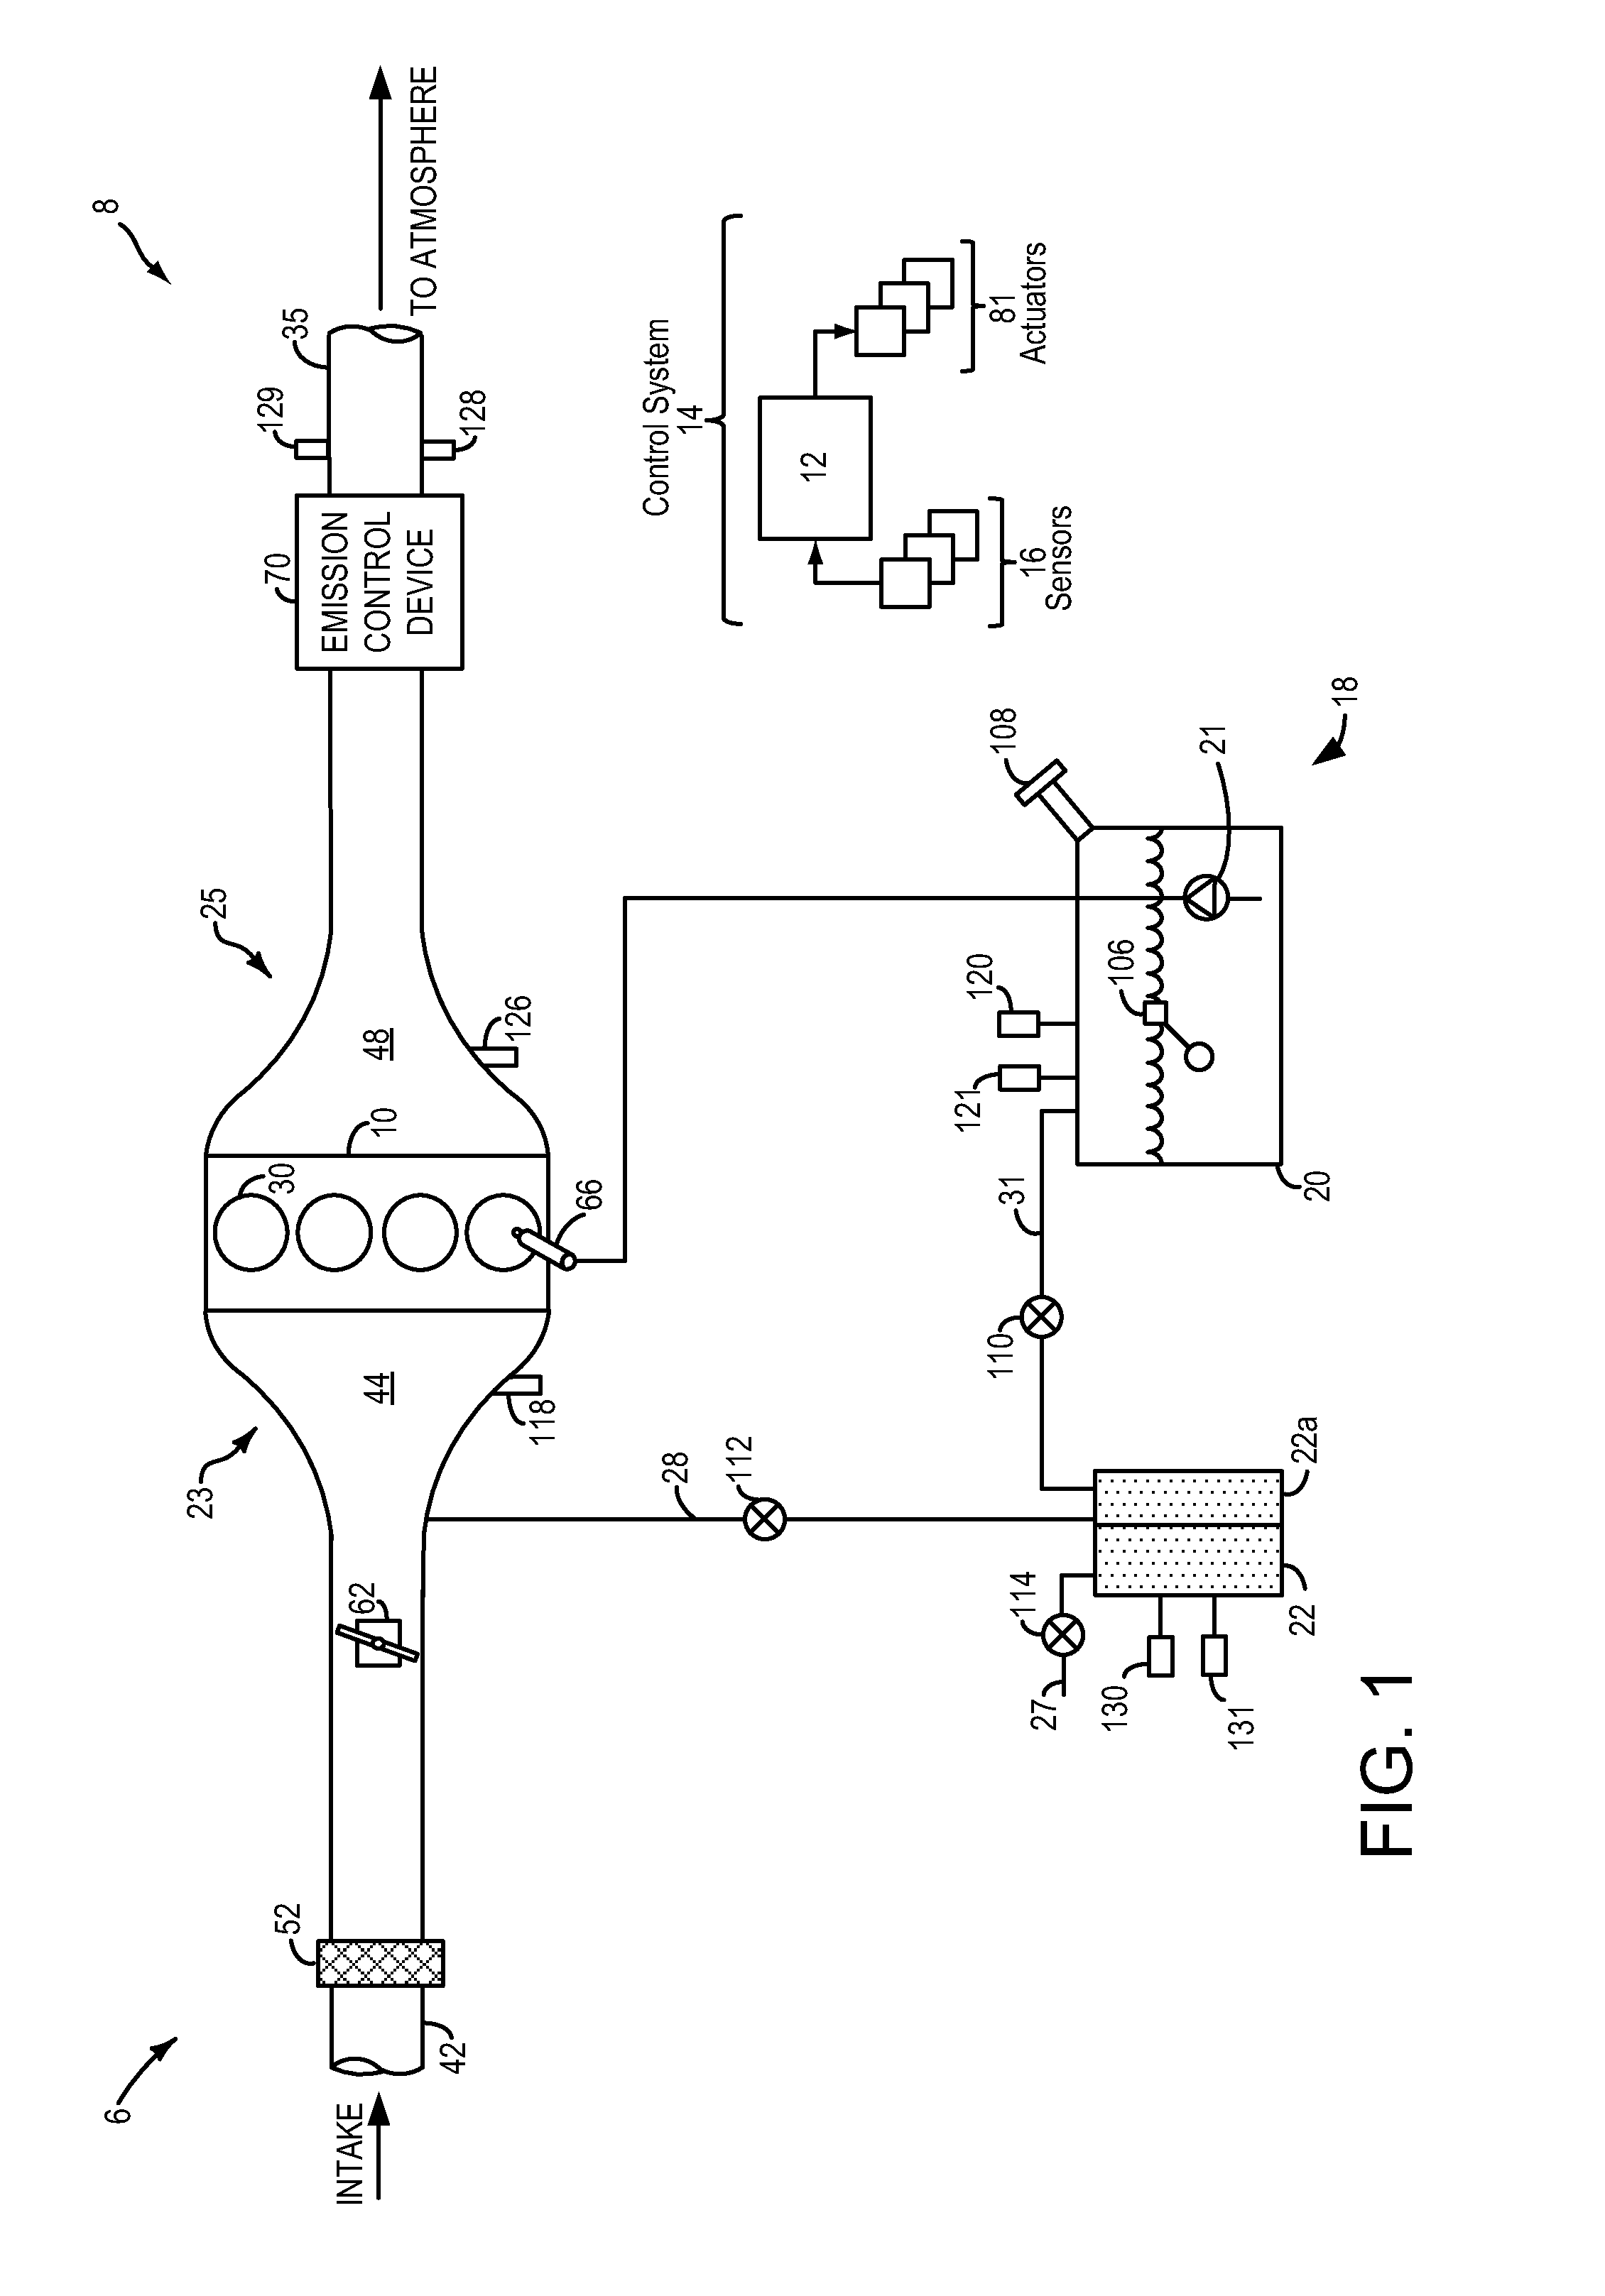 Systems and methods for managing bleed emissions in plug-in hybrid electric vehicles